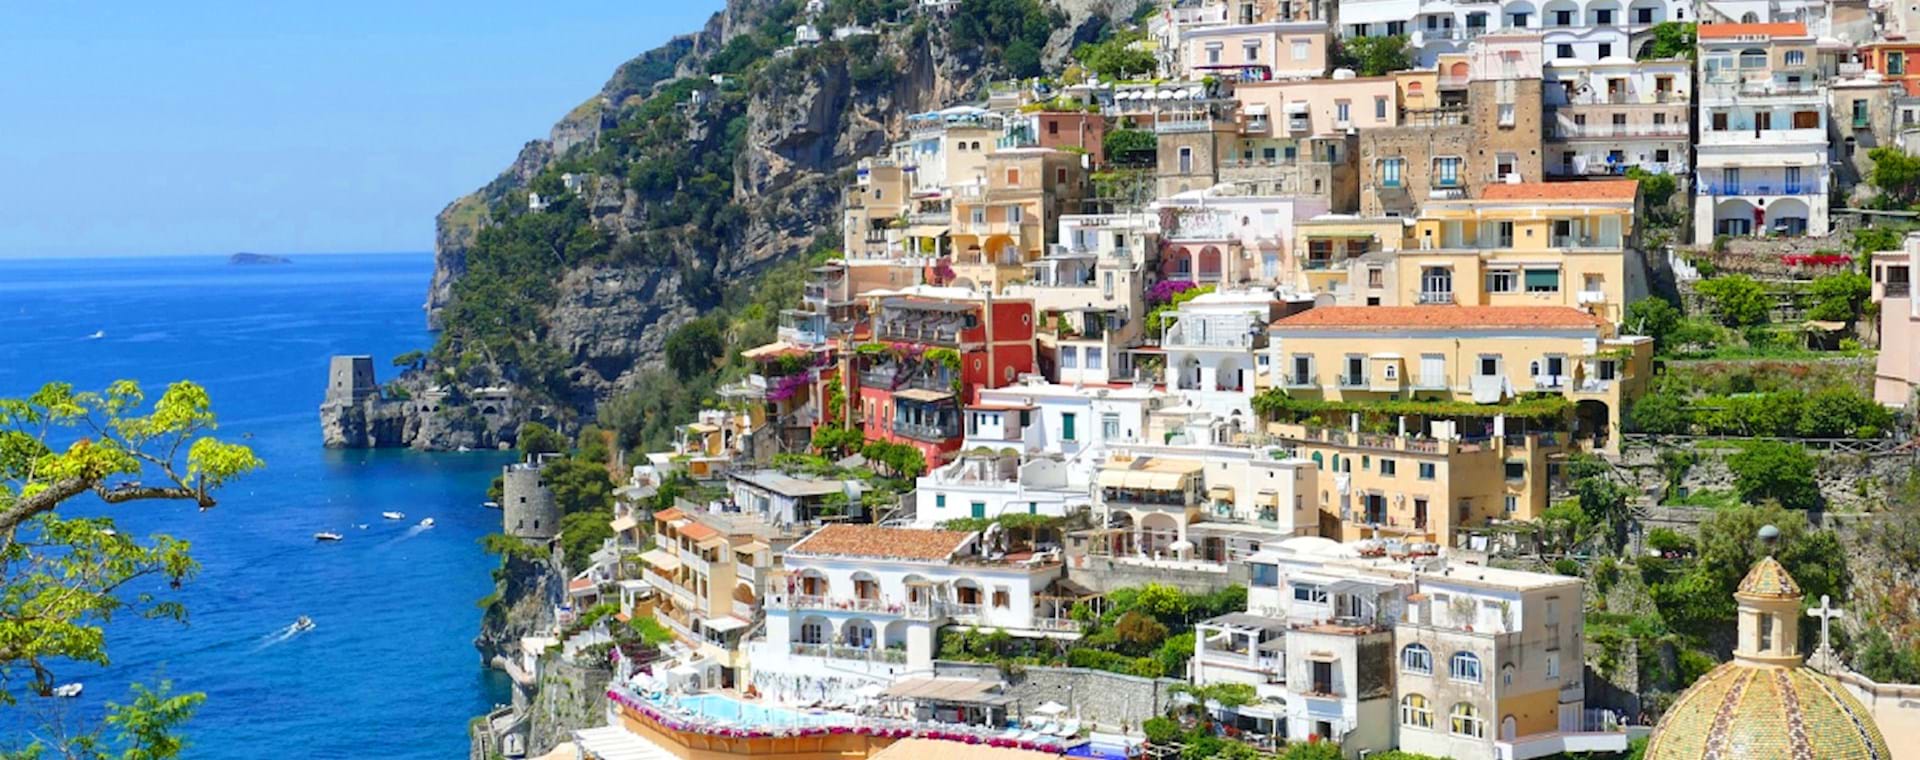 Houses in Positano going down the hill